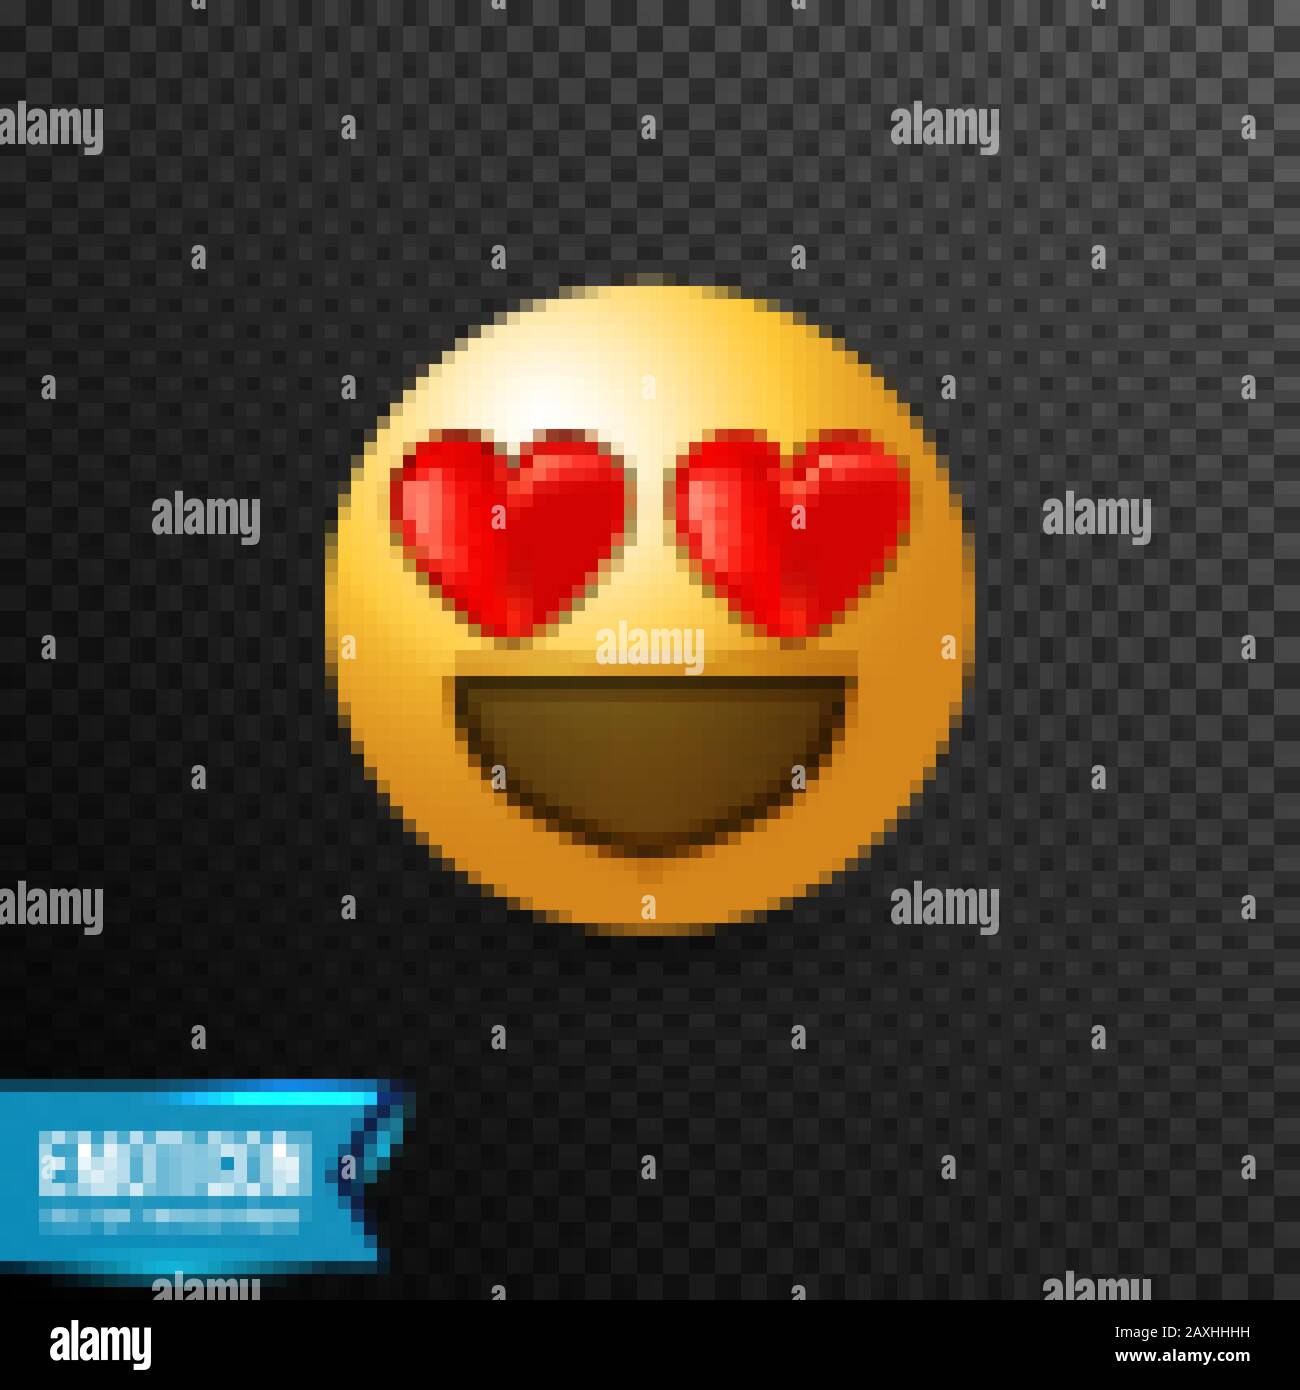 Cute feeling in love emoticon icon vector illustration, isolated ...